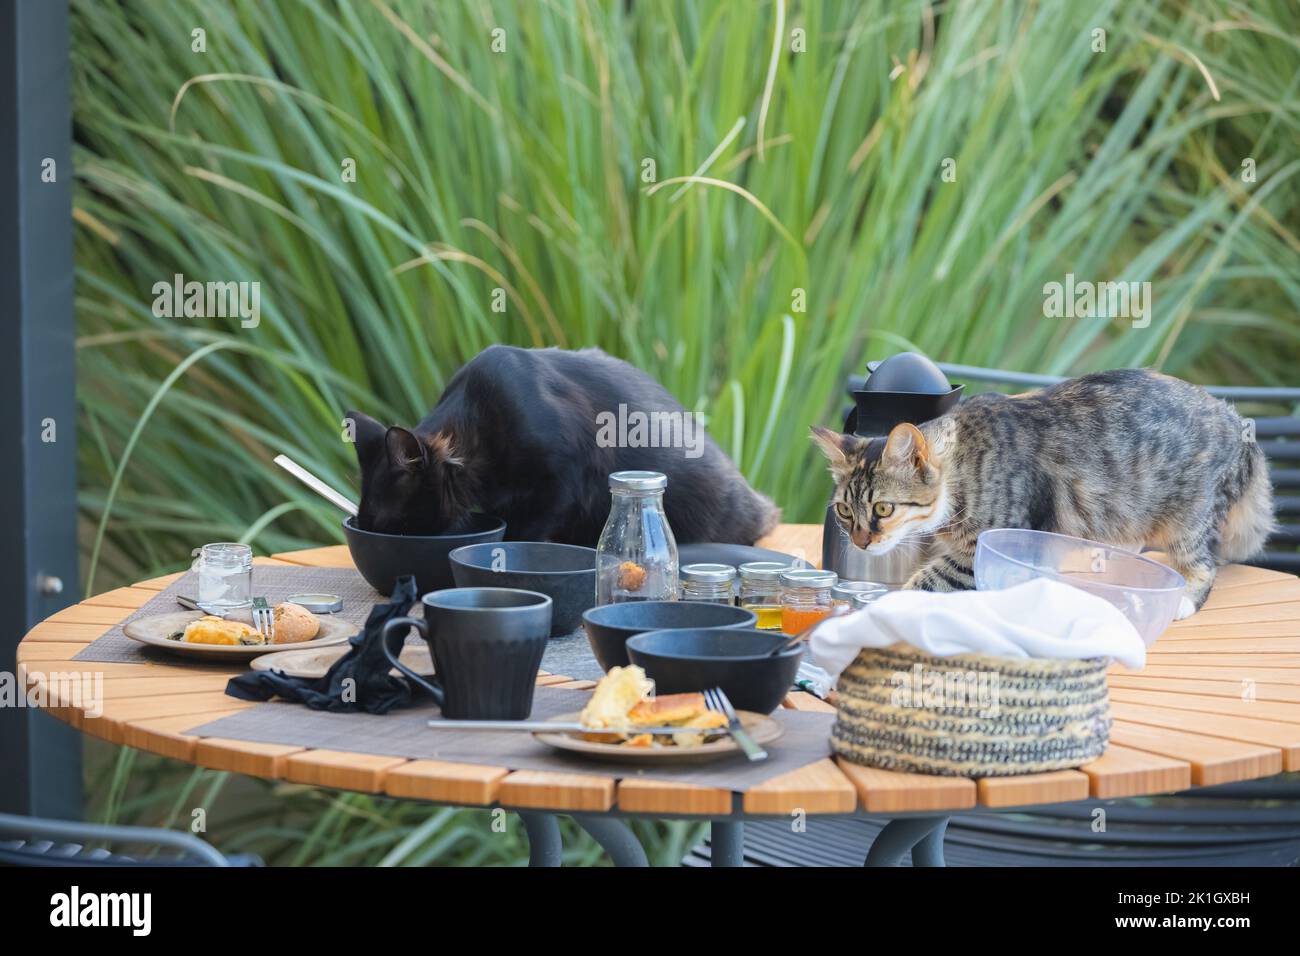 Mischievous and naughty tabby cat and black cat scavenge for food from leftover dishes on an outdoor breakfast table on the Greek island of Santorini, Stock Photo